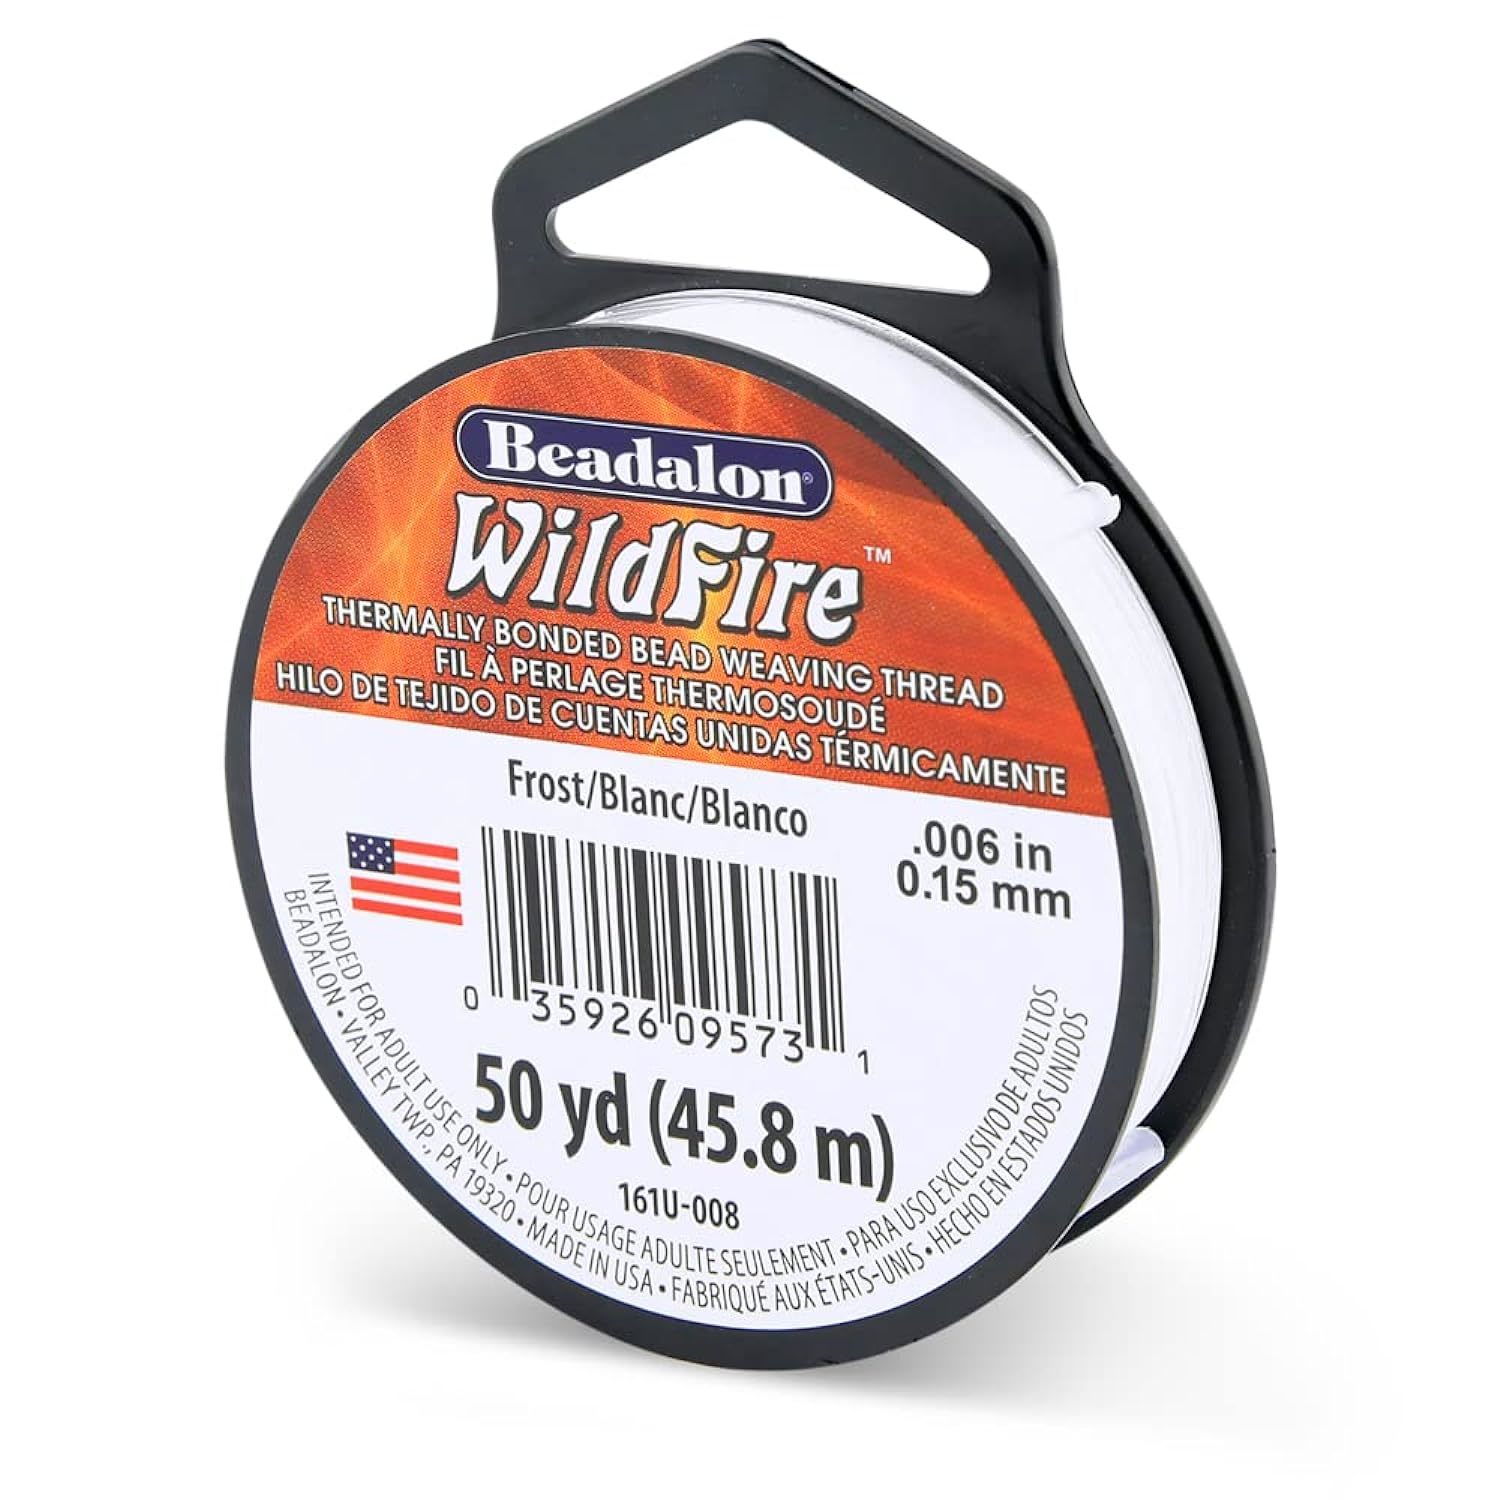 Primary image for Beadalon Wildfire.006 in, 0.15 mm, Break Strength 10 lb / 4.5 kg, Frost, 50 yd /